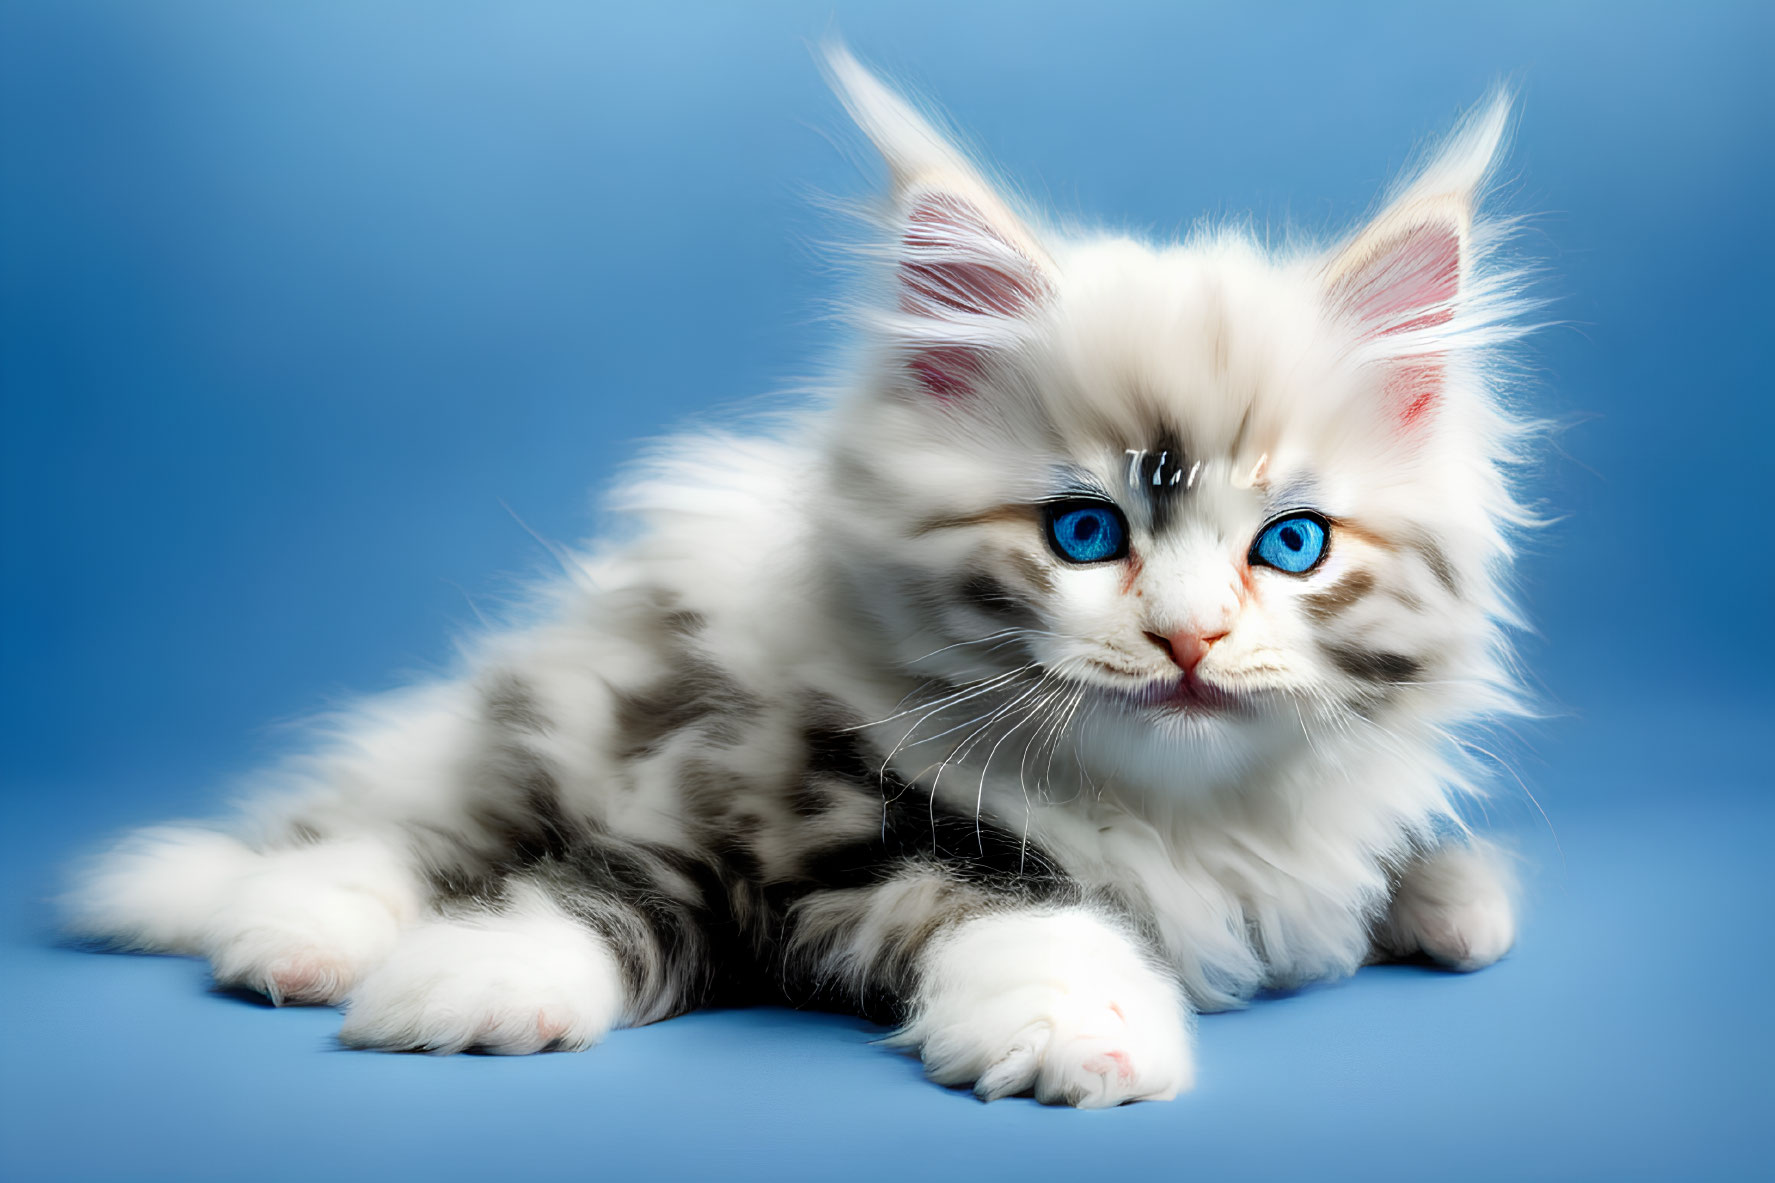 Fluffy White Kitten with Black Spots and Blue Eyes on Blue Background